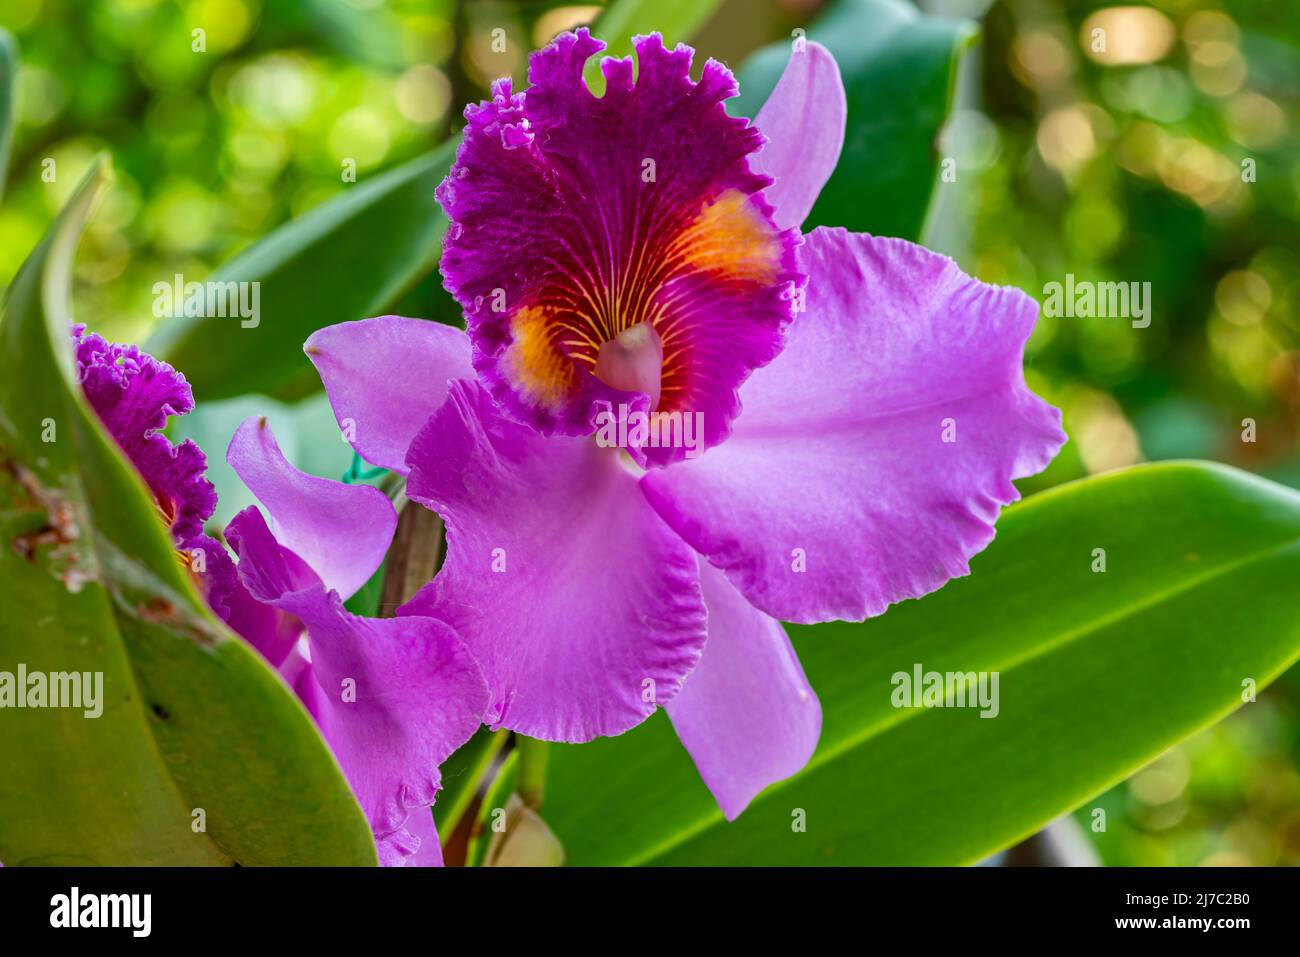 Closeup view of beautiful blooming Cattleya Orchid Flower with green leaves. Cattleya, the beautiful pink orchid flower. Stock Photo